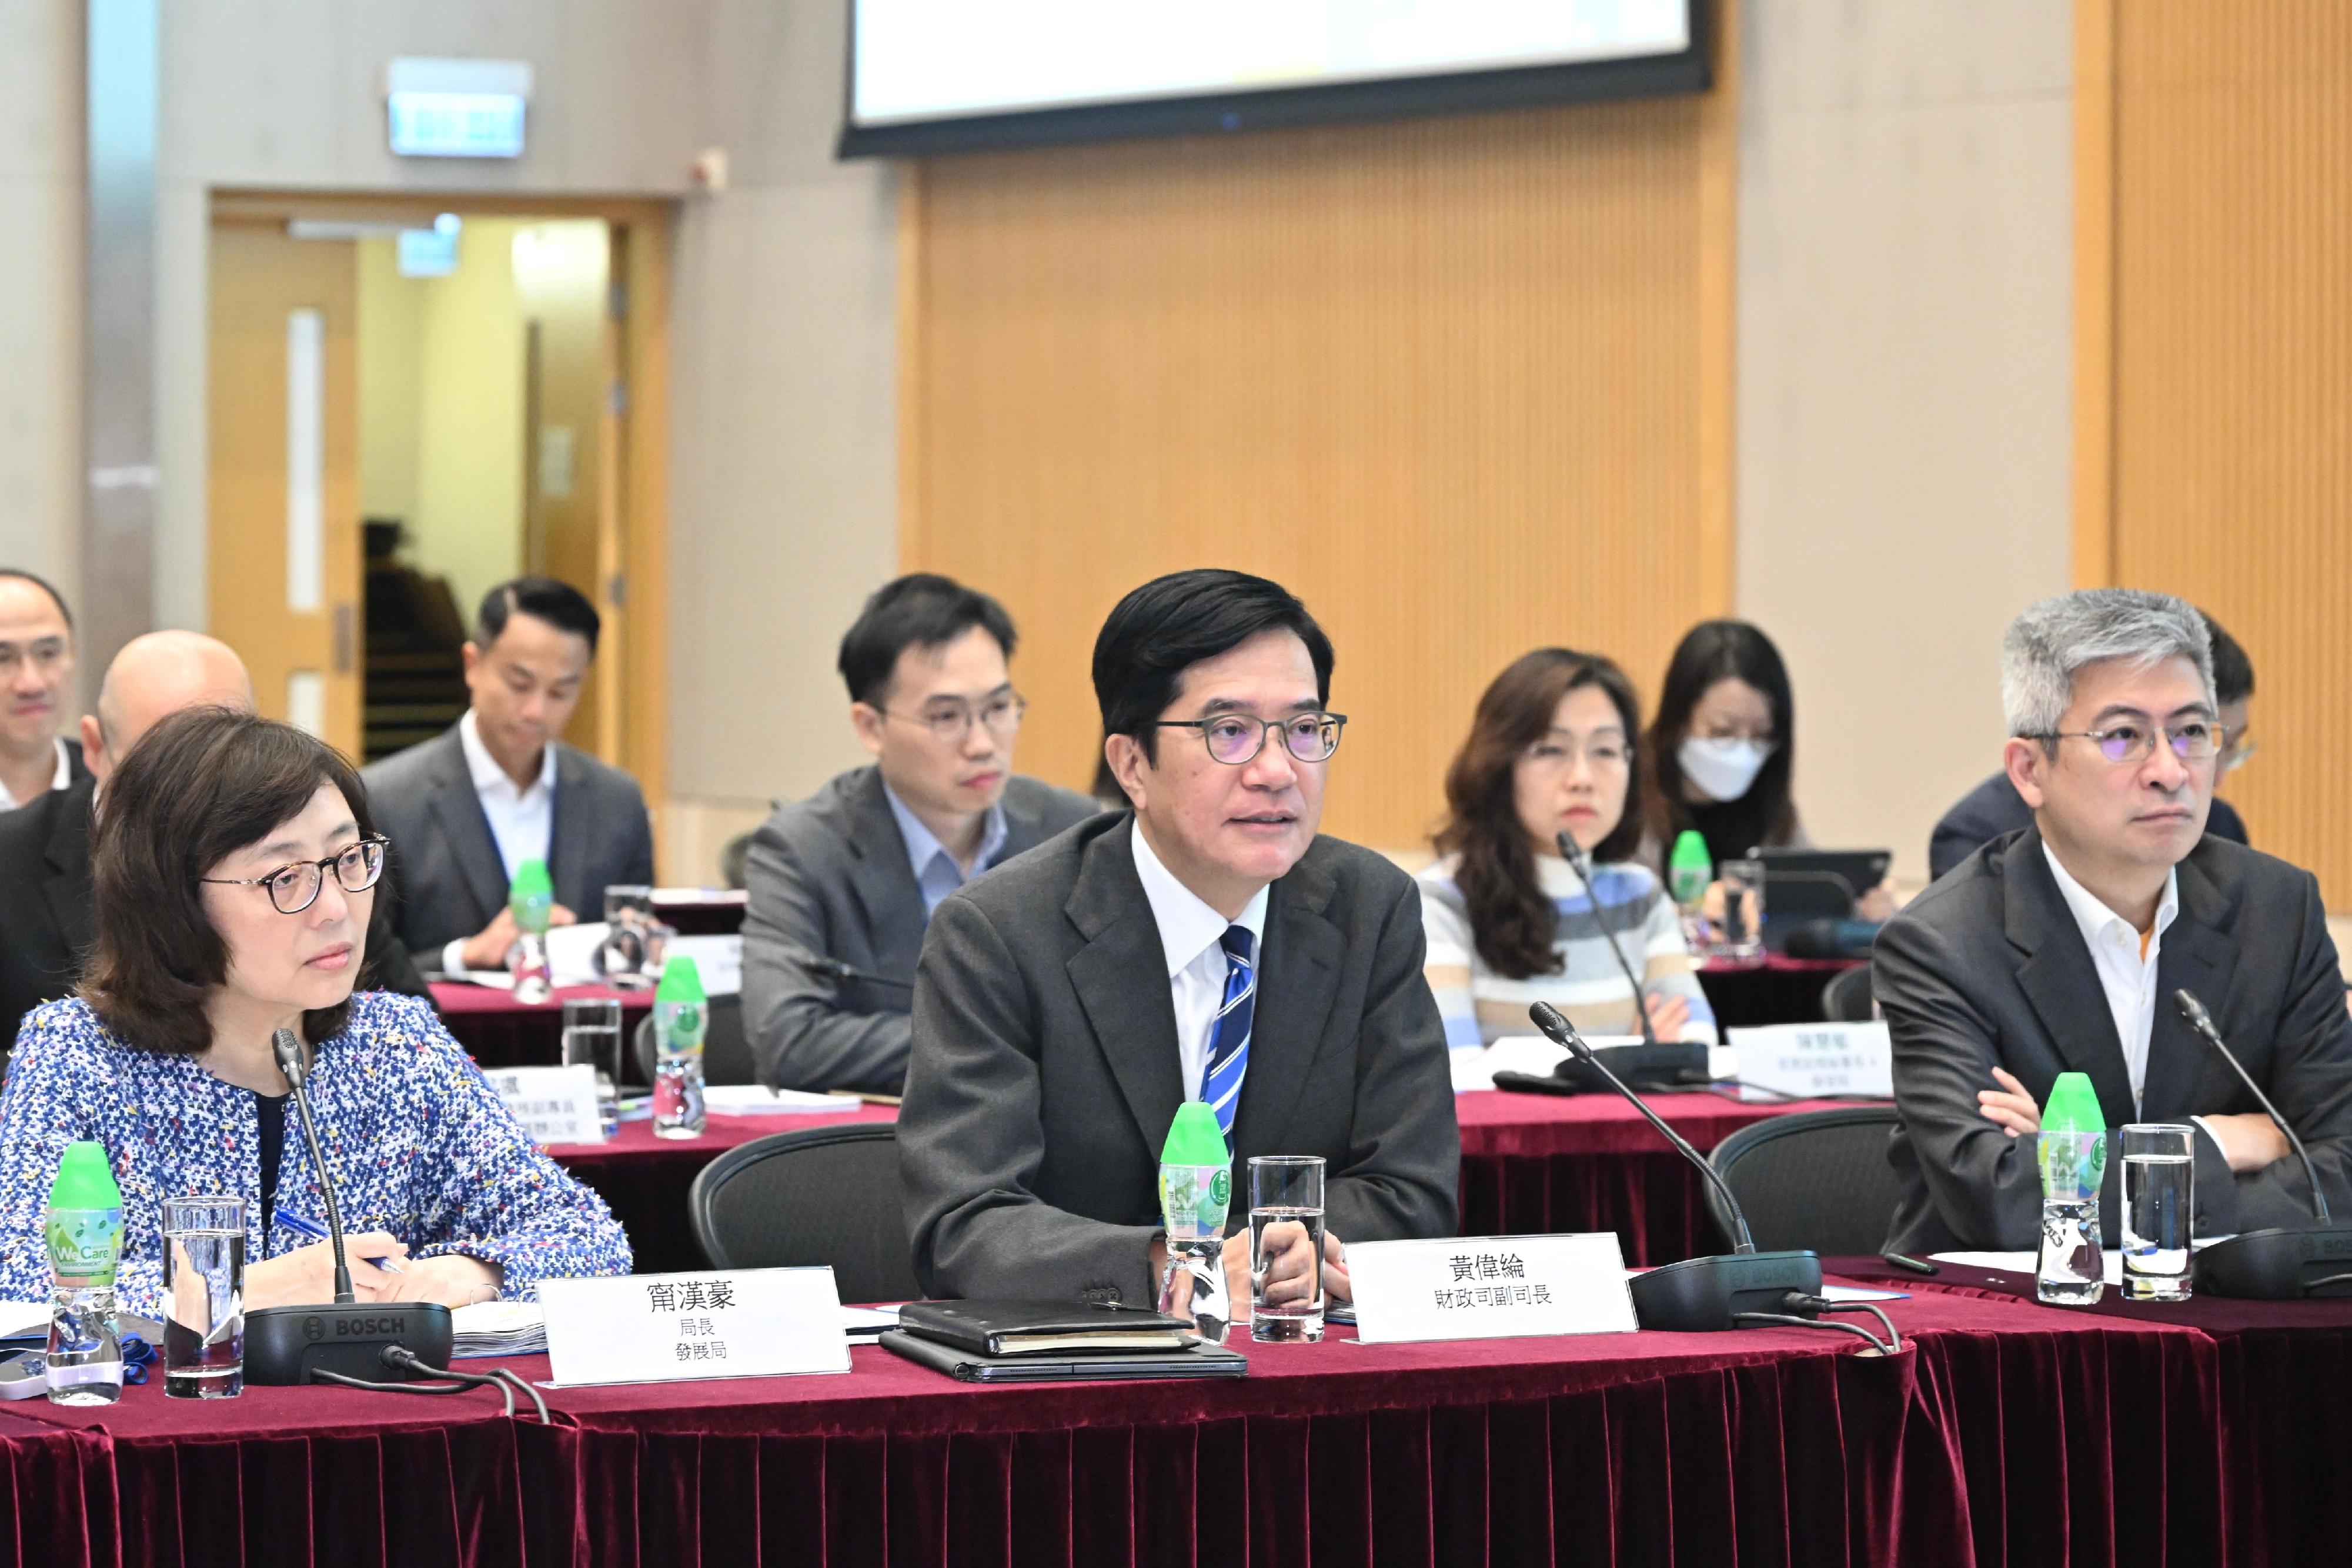 The Deputy Financial Secretary, Mr Michael Wong, and Vice Mayor of the Shenzhen Municipal People's Government Mr Tao Yongxin, leading delegations of the governments of the Hong Kong Special Administrative Region and Shenzhen respectively, held the fourth meeting of the Task Force for Collaboration on the Northern Metropolis Development Strategy in Hong Kong today (February 7). Photo shows Mr Wong (centre) giving opening remarks at the meeting. Looking on are the Secretary for Development, Ms Bernadette Linn (left), and the Under Secretary for Culture, Sports and Tourism, Mr Raistlin Lau (right).